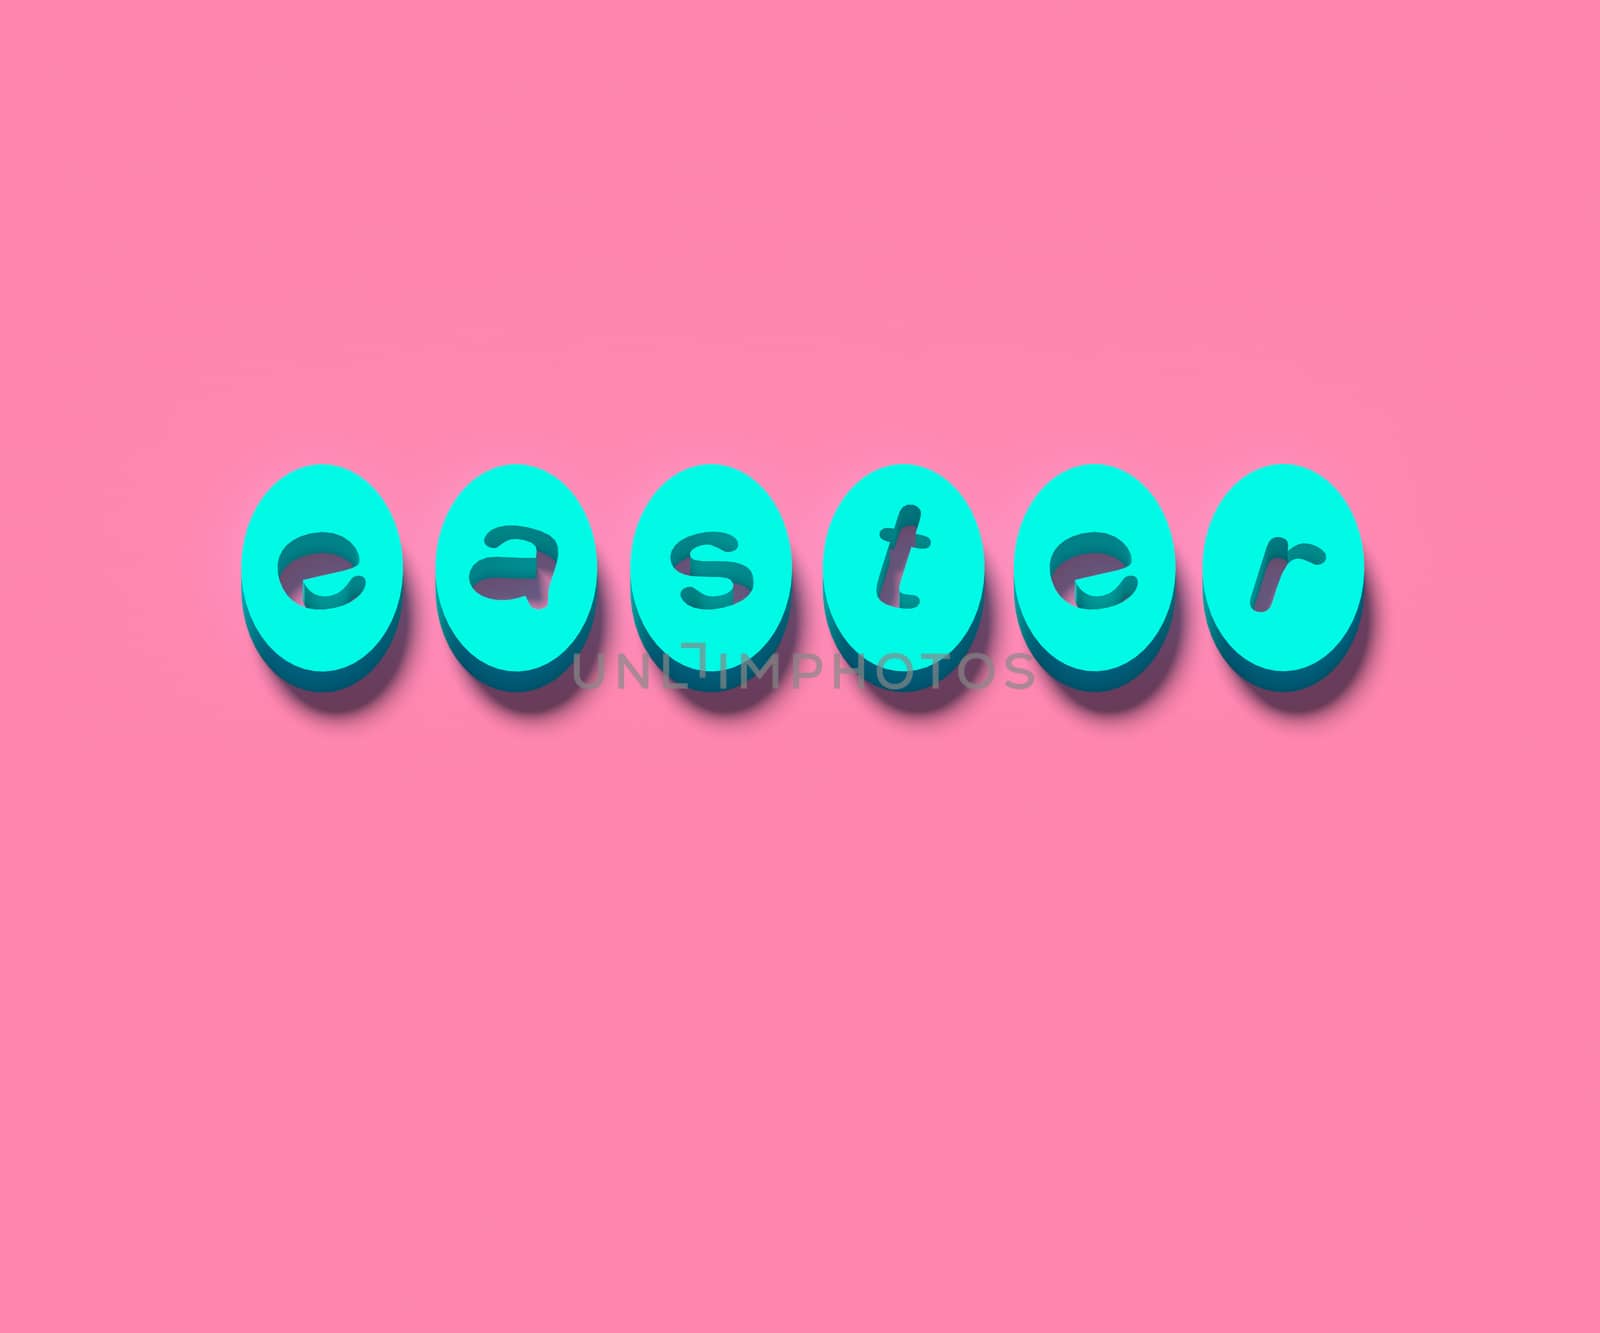 COLOR PHOTO OF 3D WORDS OF 'EASTER' ON PLAIN BACKGROUND